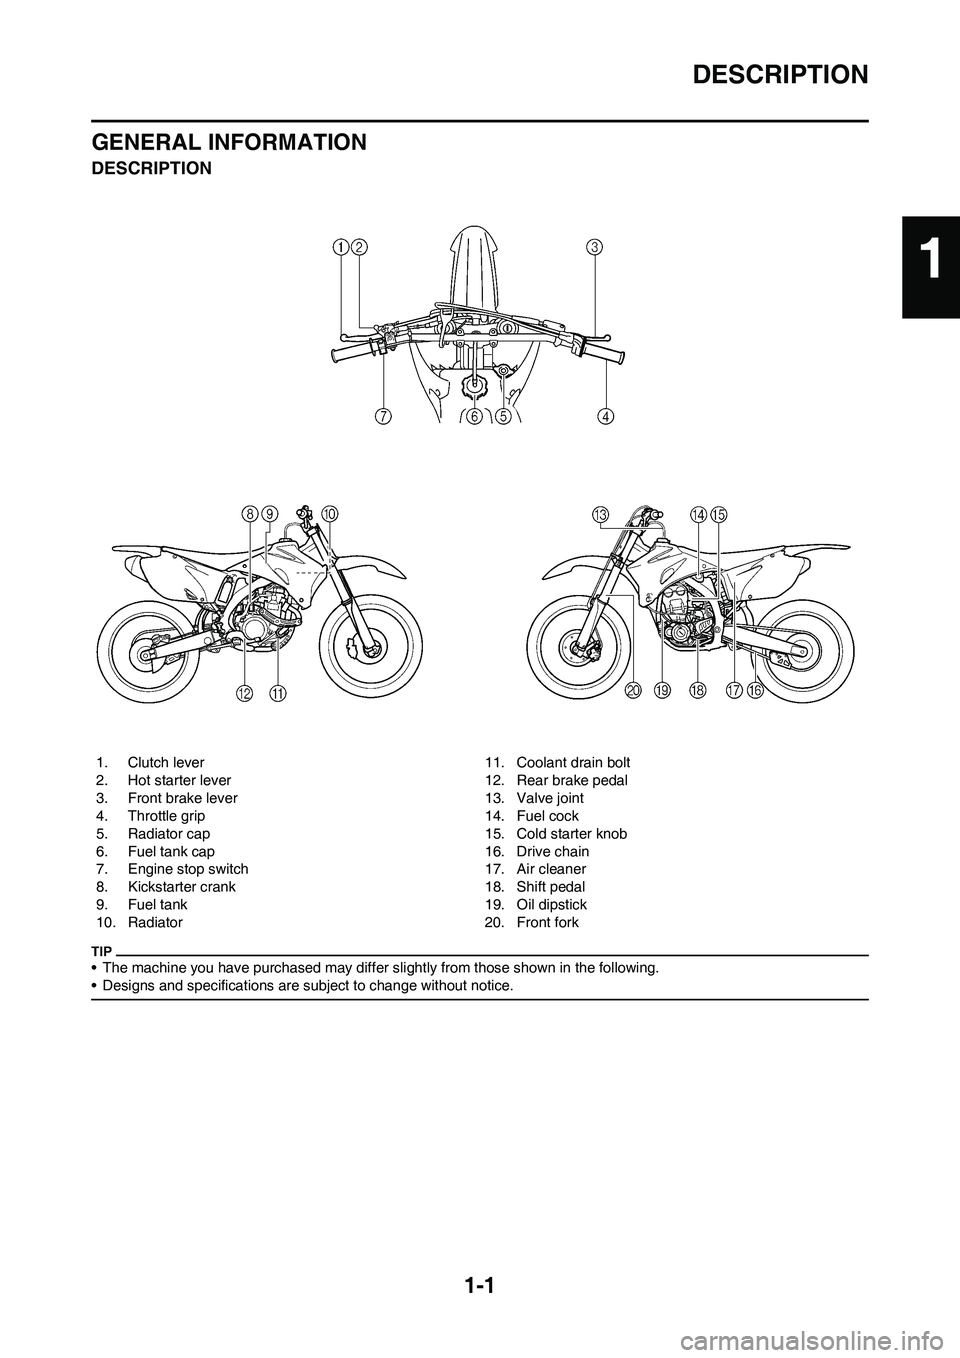 YAMAHA YZ450F 2009  Owners Manual 1-1
DESCRIPTION
GENERAL INFORMATION
DESCRIPTION
• The machine you have purchased may differ slightly from those shown in the following.
• Designs and specifications are subject to change without n